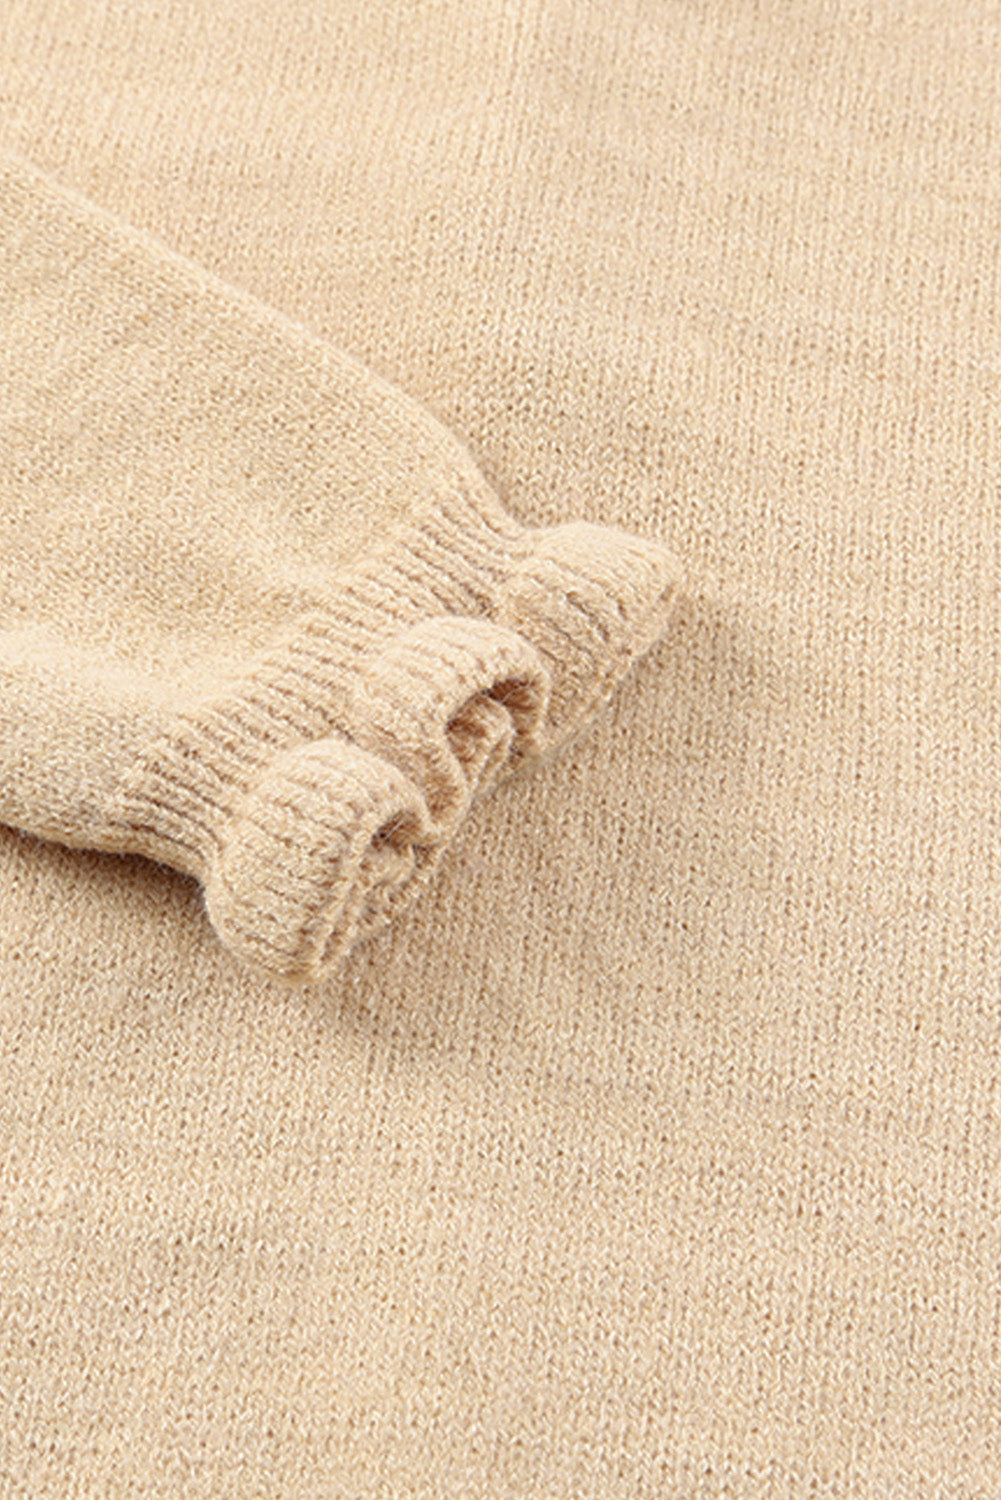 Beige Frill Trim Button Casual Knit Pullover Sweater